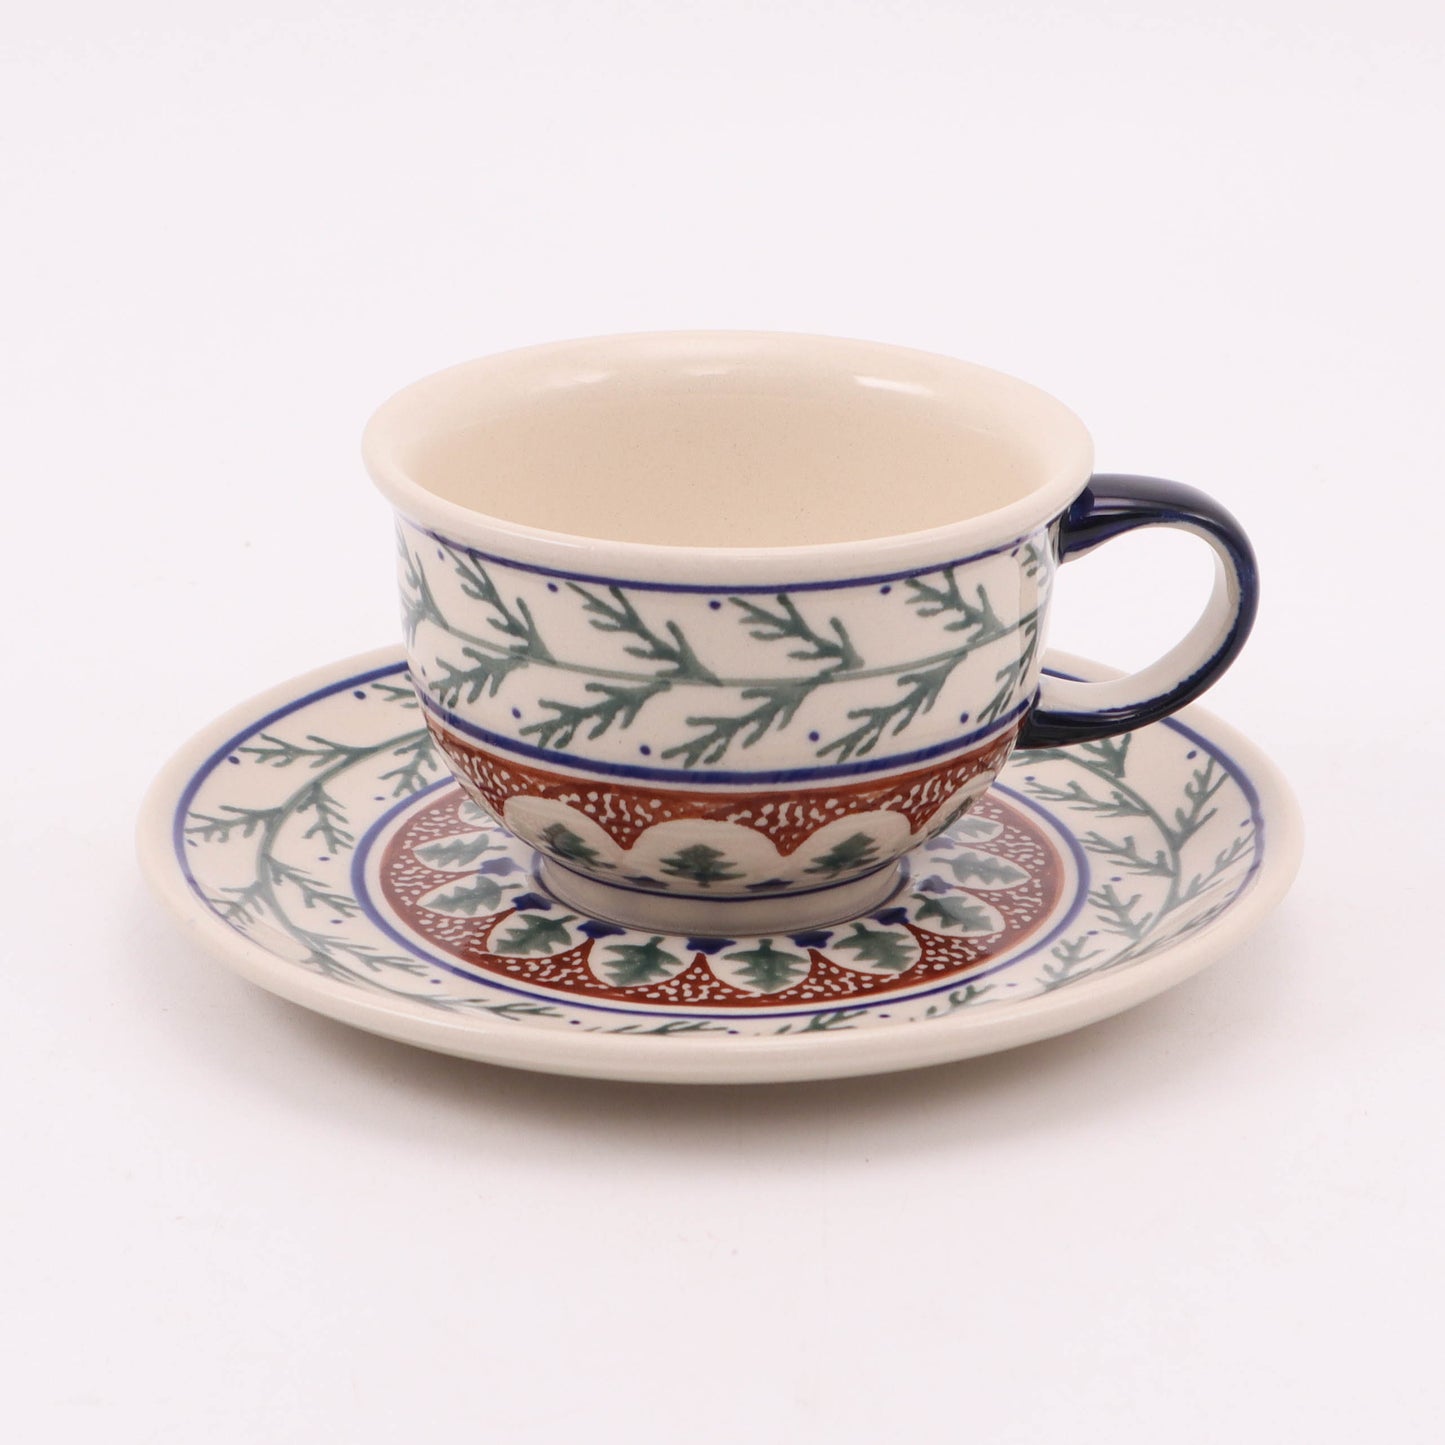 6oz Teacup with Saucer 2nd. Pattern: Pine